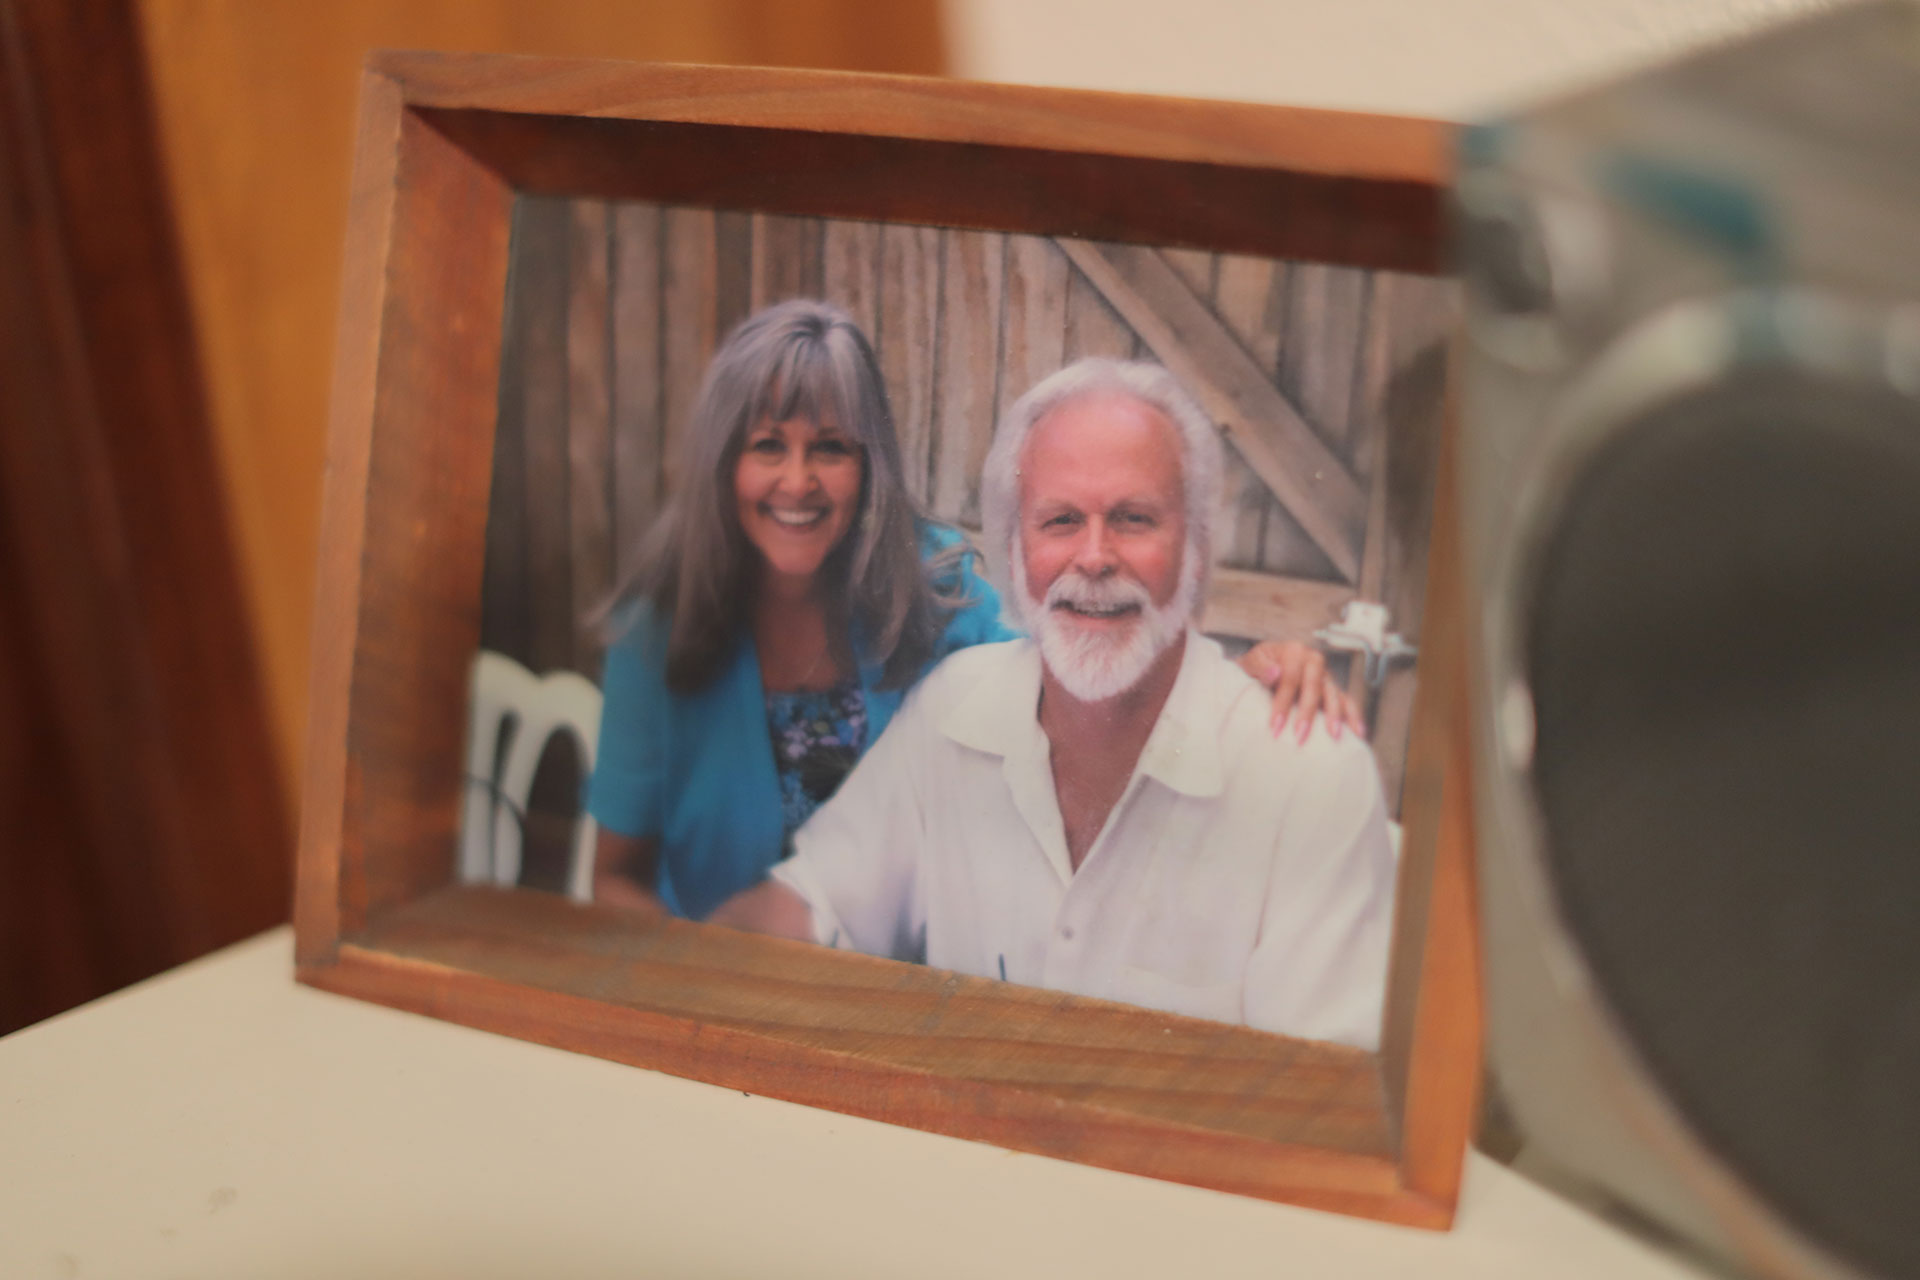 A man and a woman embrace in a photo in a wooden frame next to a boombox.